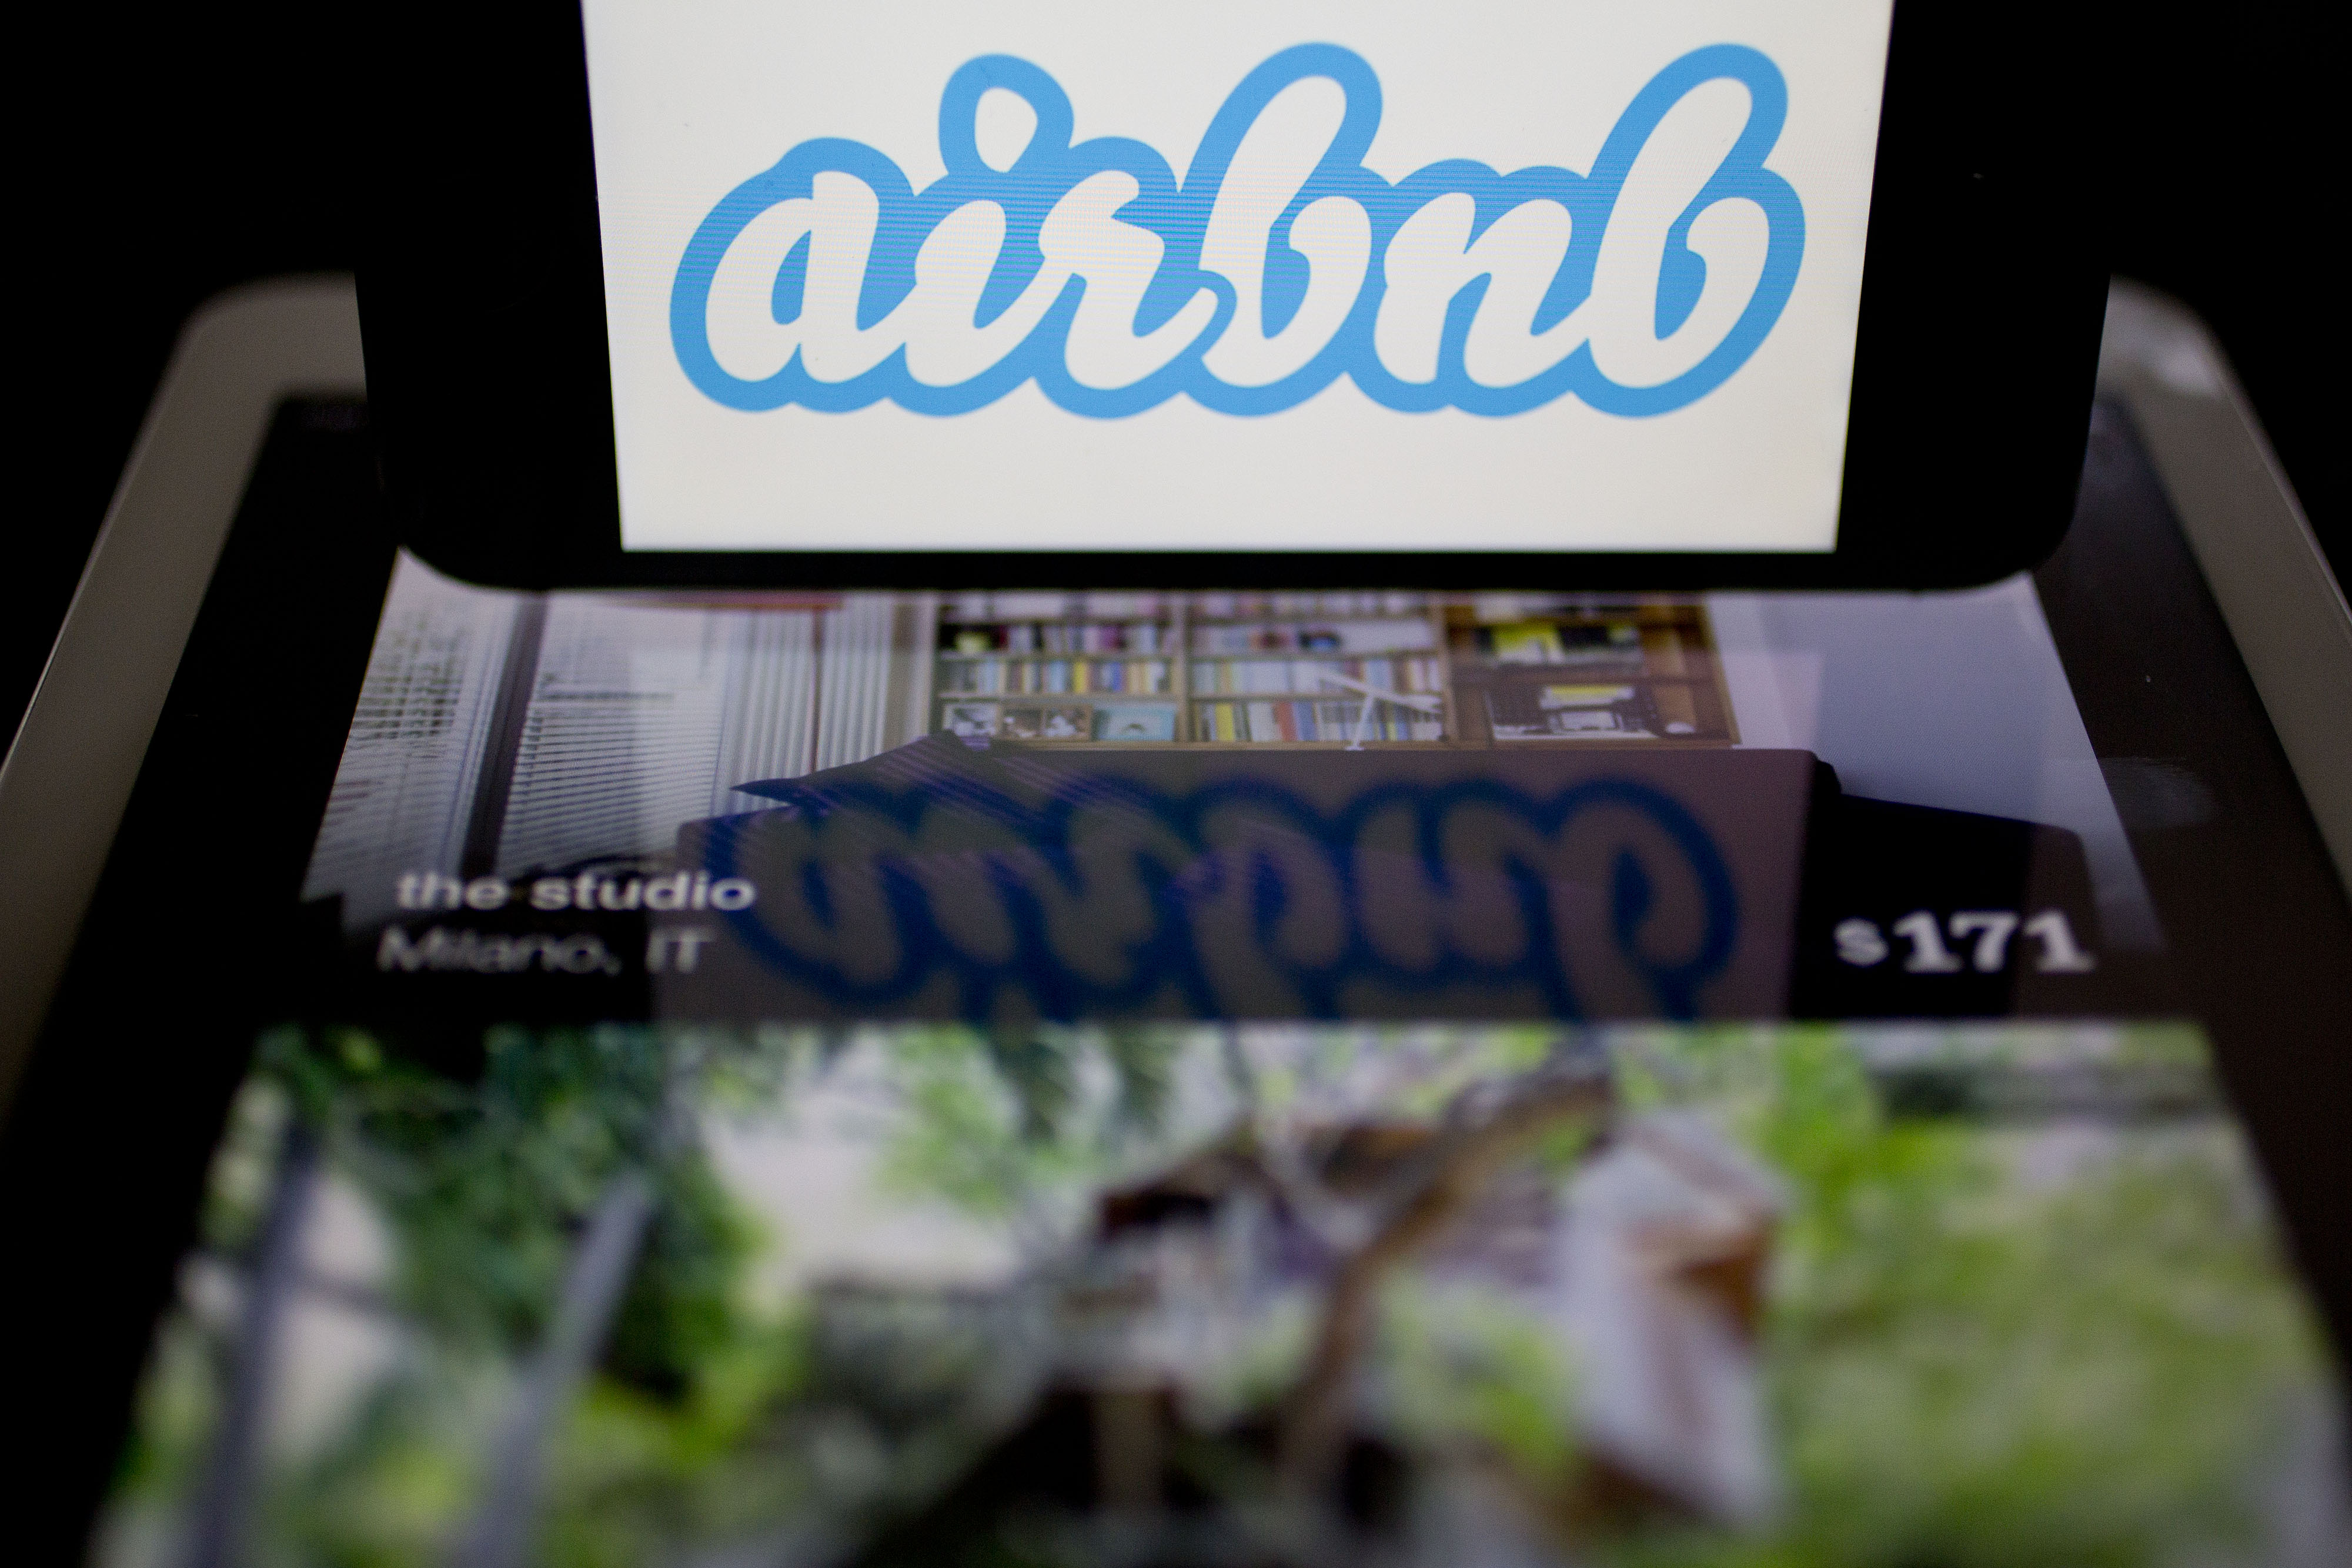 Airbnb Said to Be Raising Funding At $10 Billion Valuation